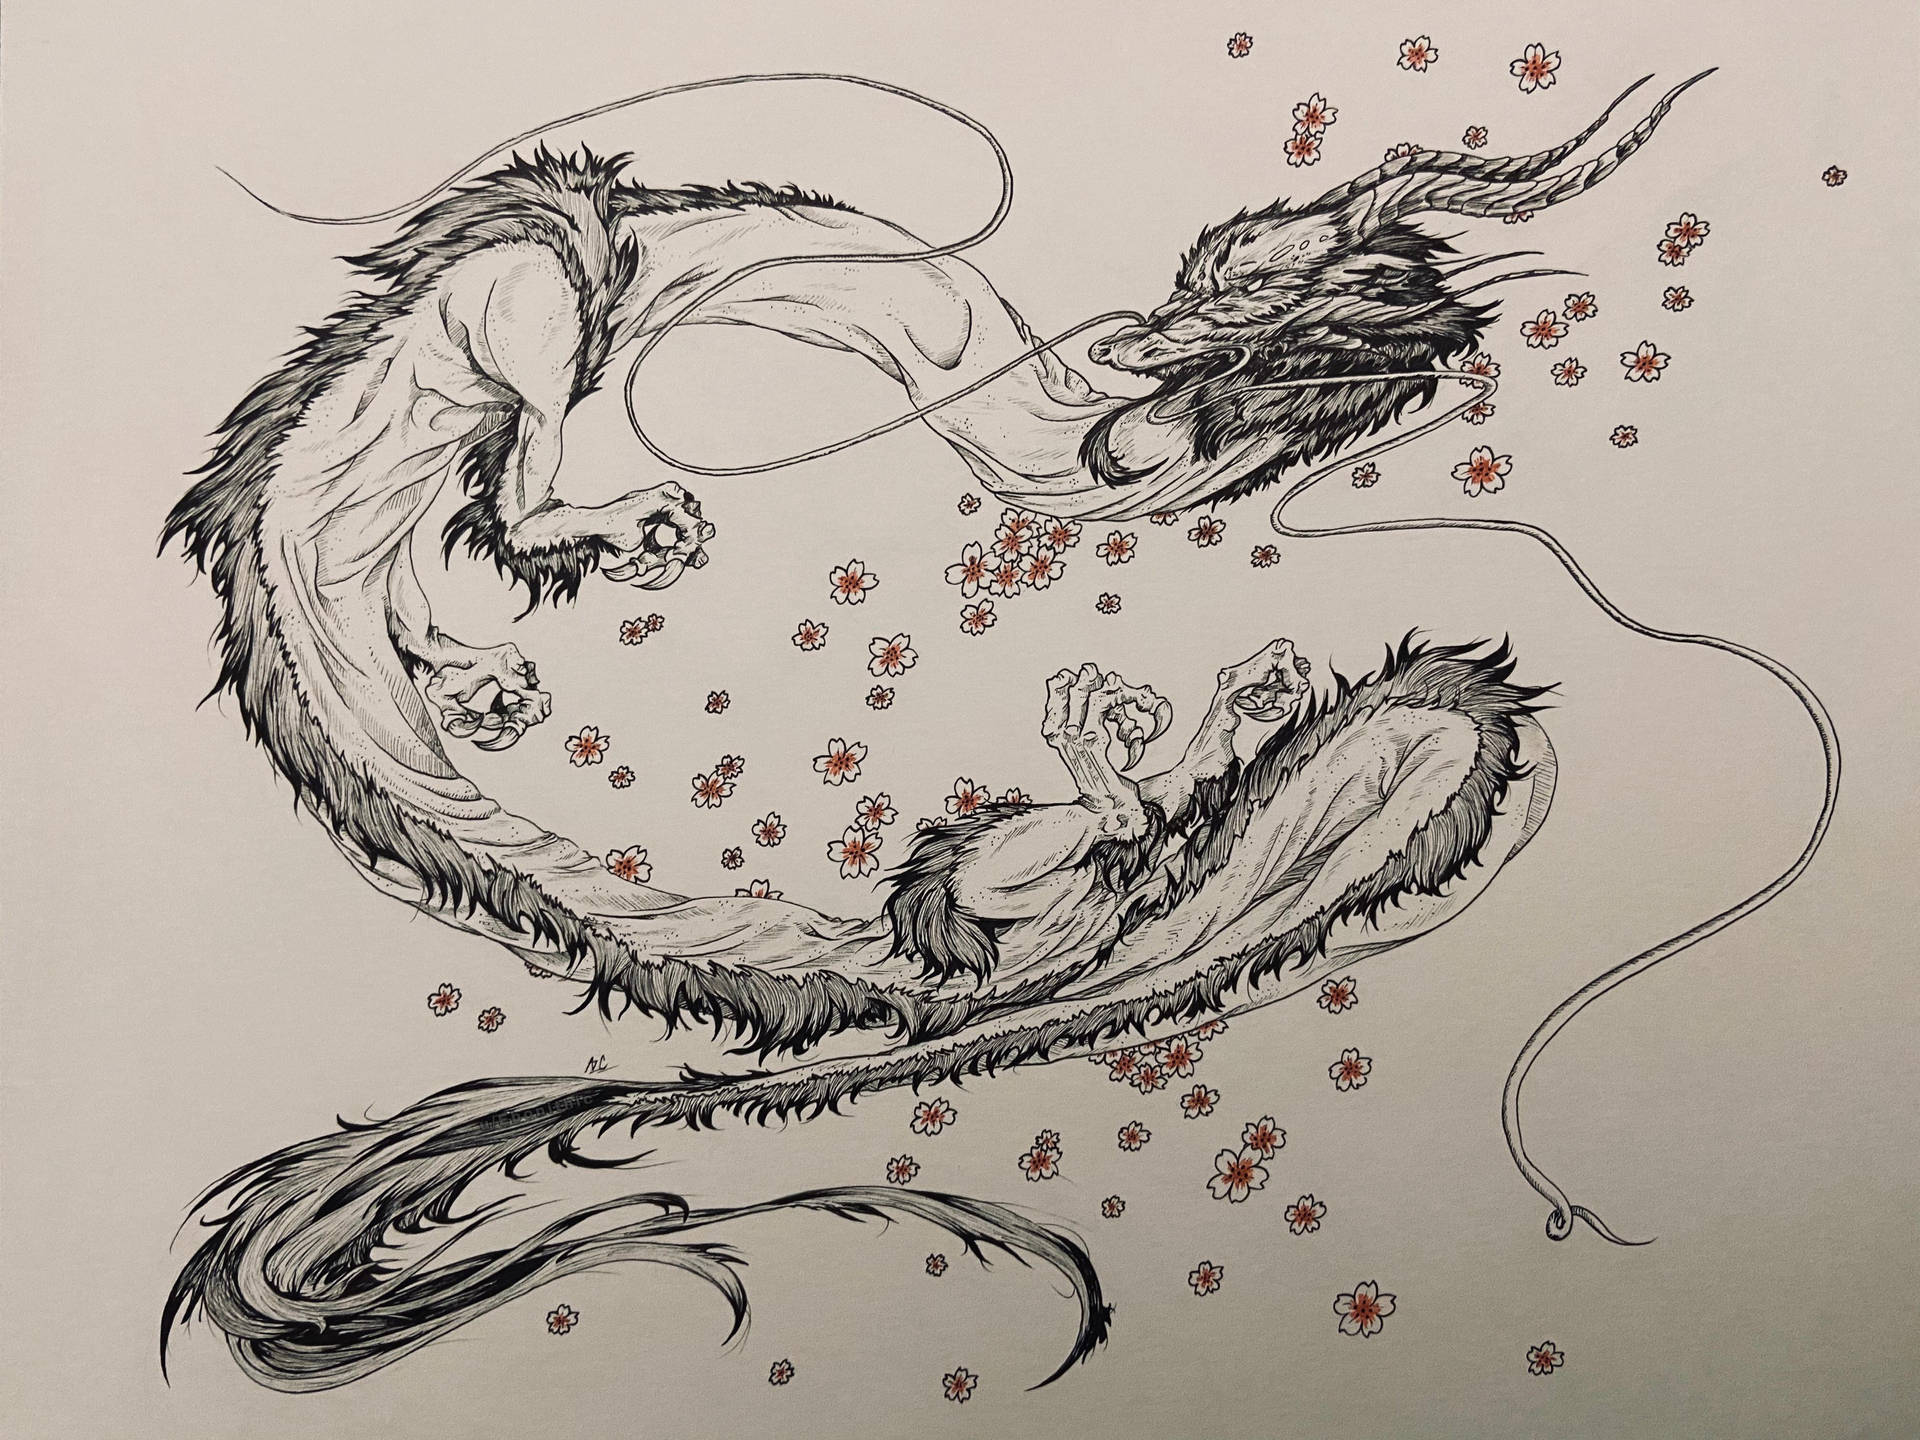 Japanese Dragon Art With Flowing Body